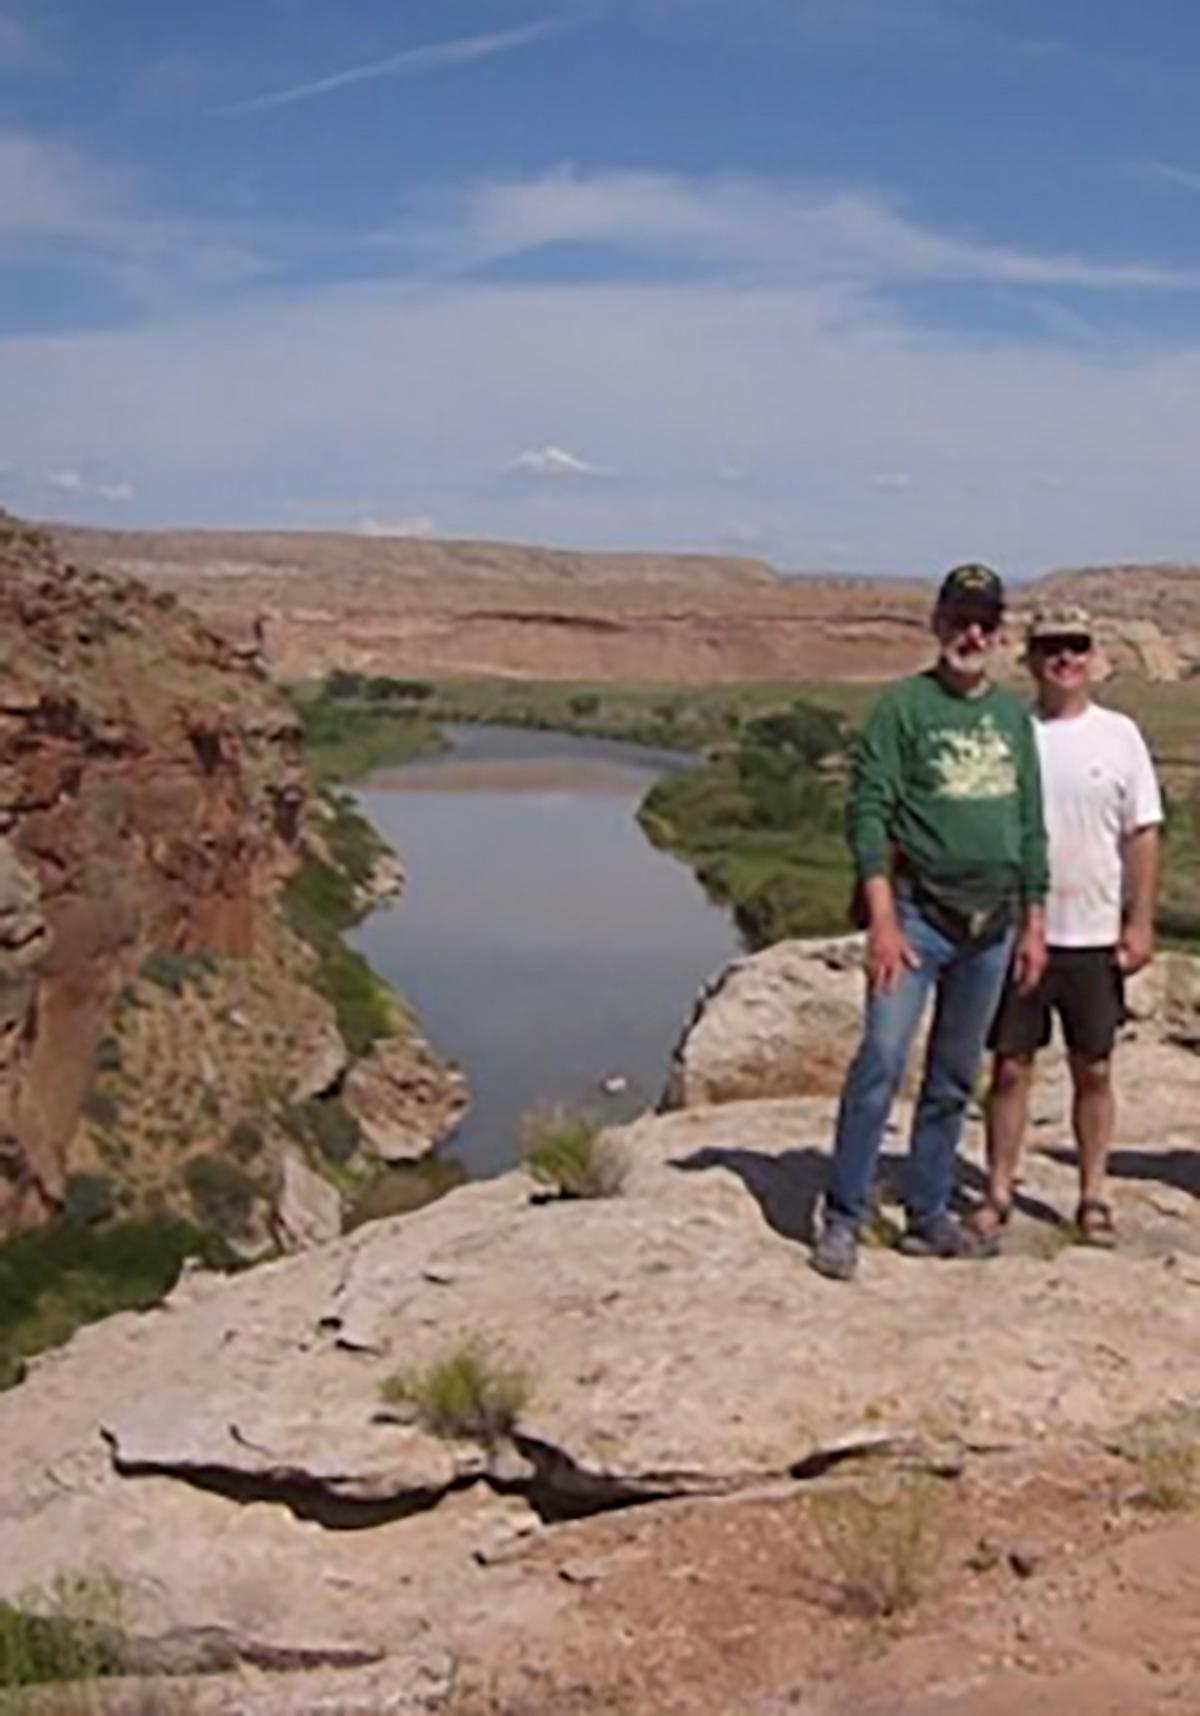 University of Minnesota colleague Dick Poppele and me on the Westwater overlook of the Colorado River.